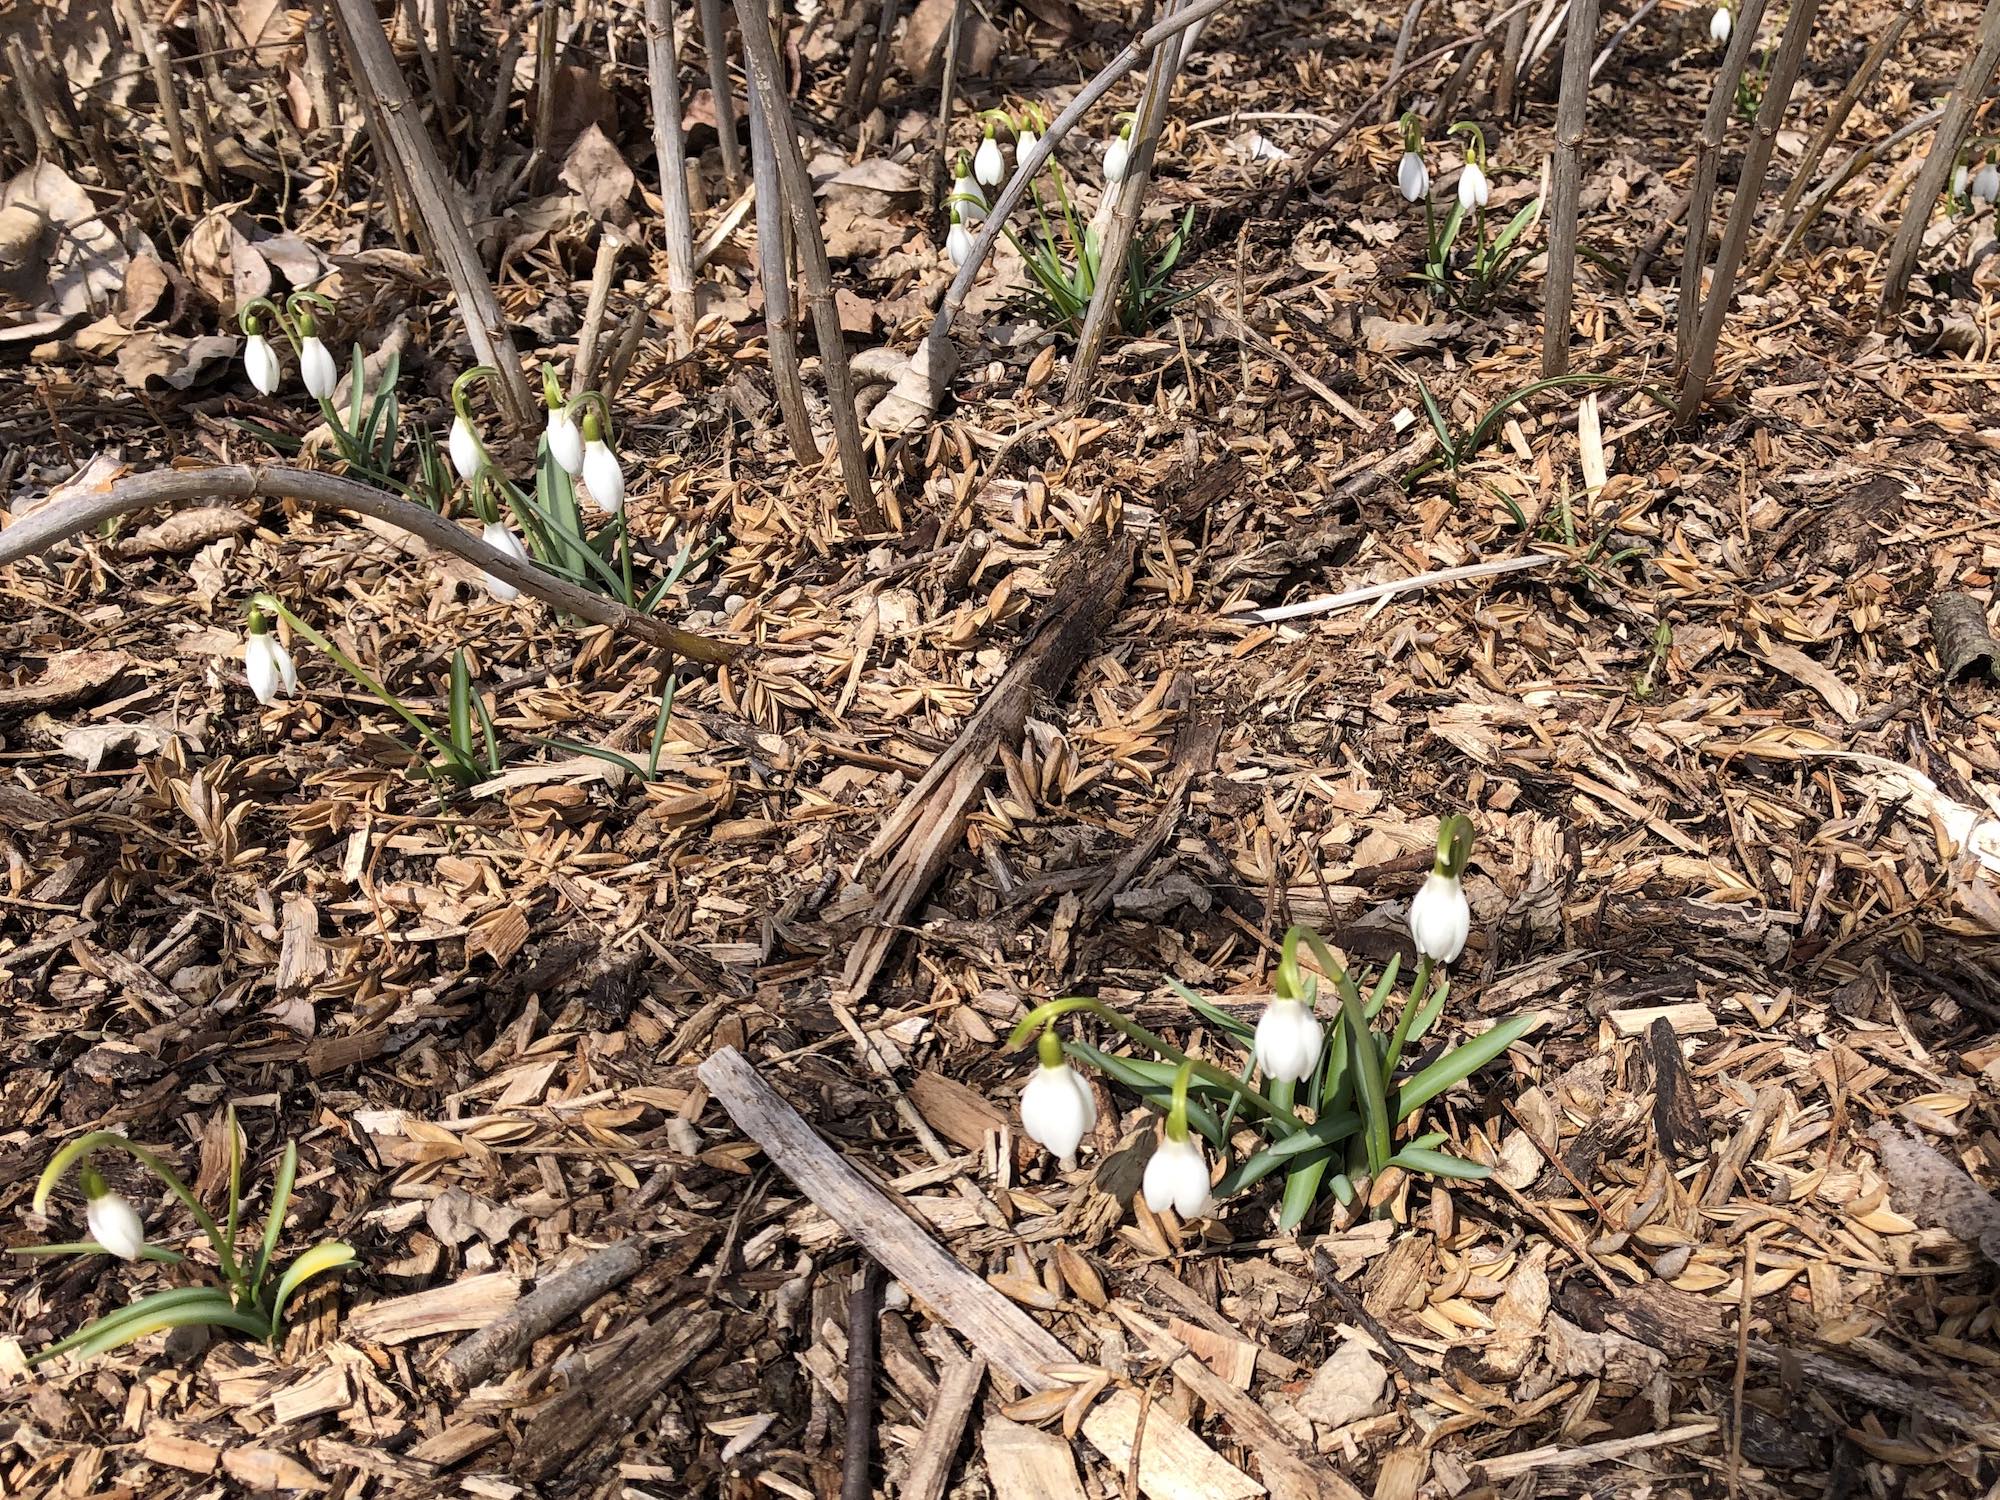 Snowdrops in the University of Wisconsin Arboretum in Madison, Wisconsin on March 26, 2019.